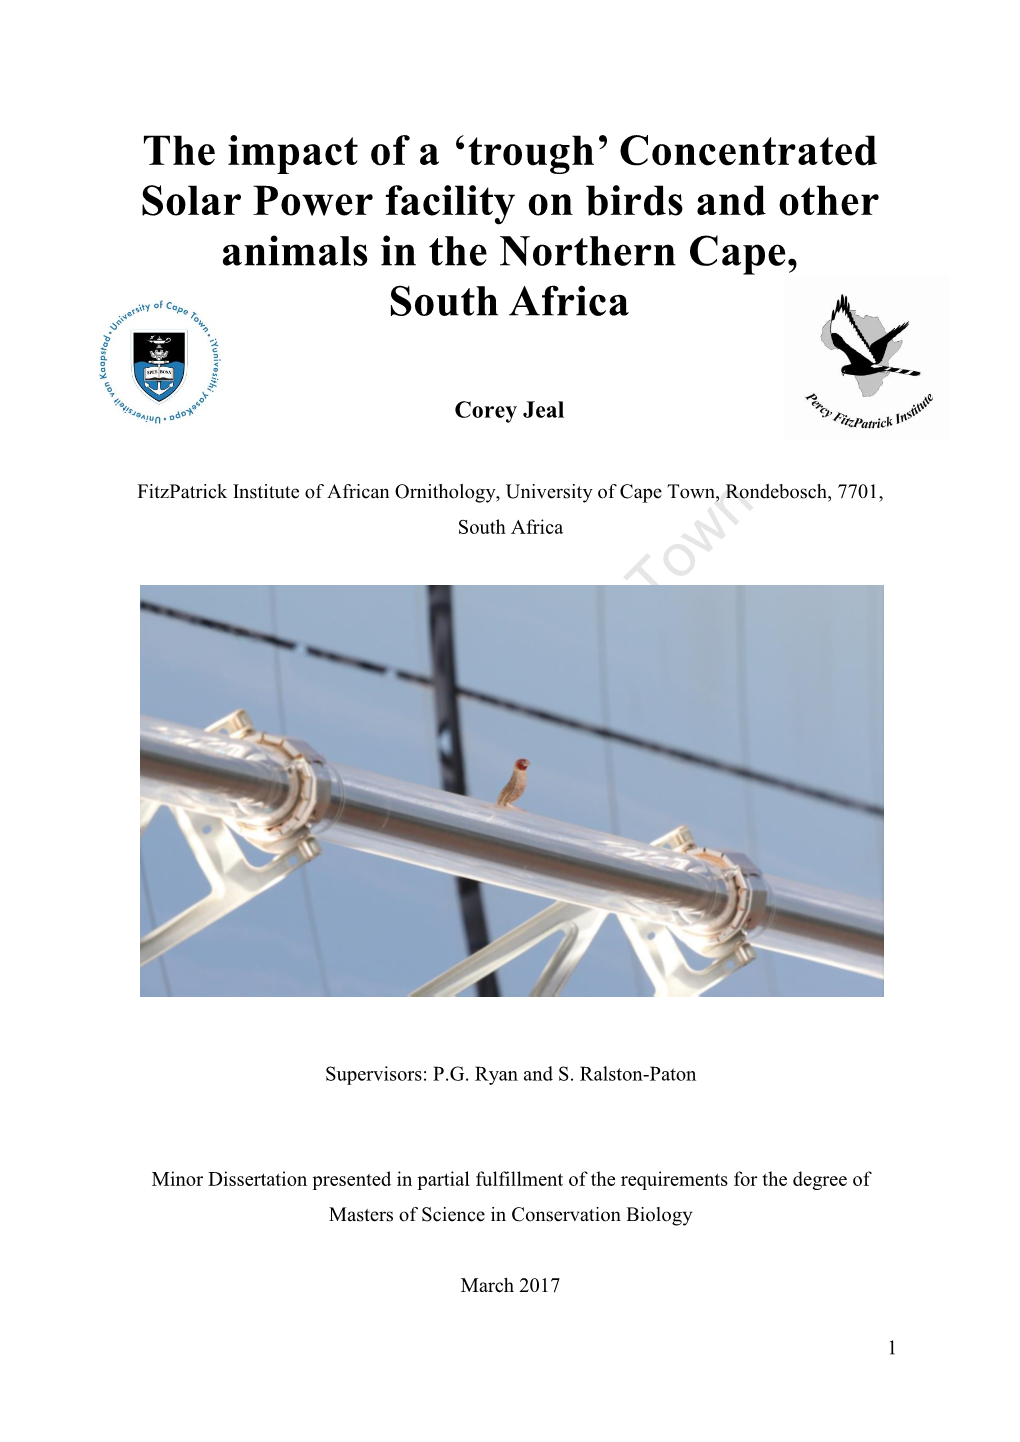 The Impact of a 'Trough' Concentrated Solar Power Facility on Birds And